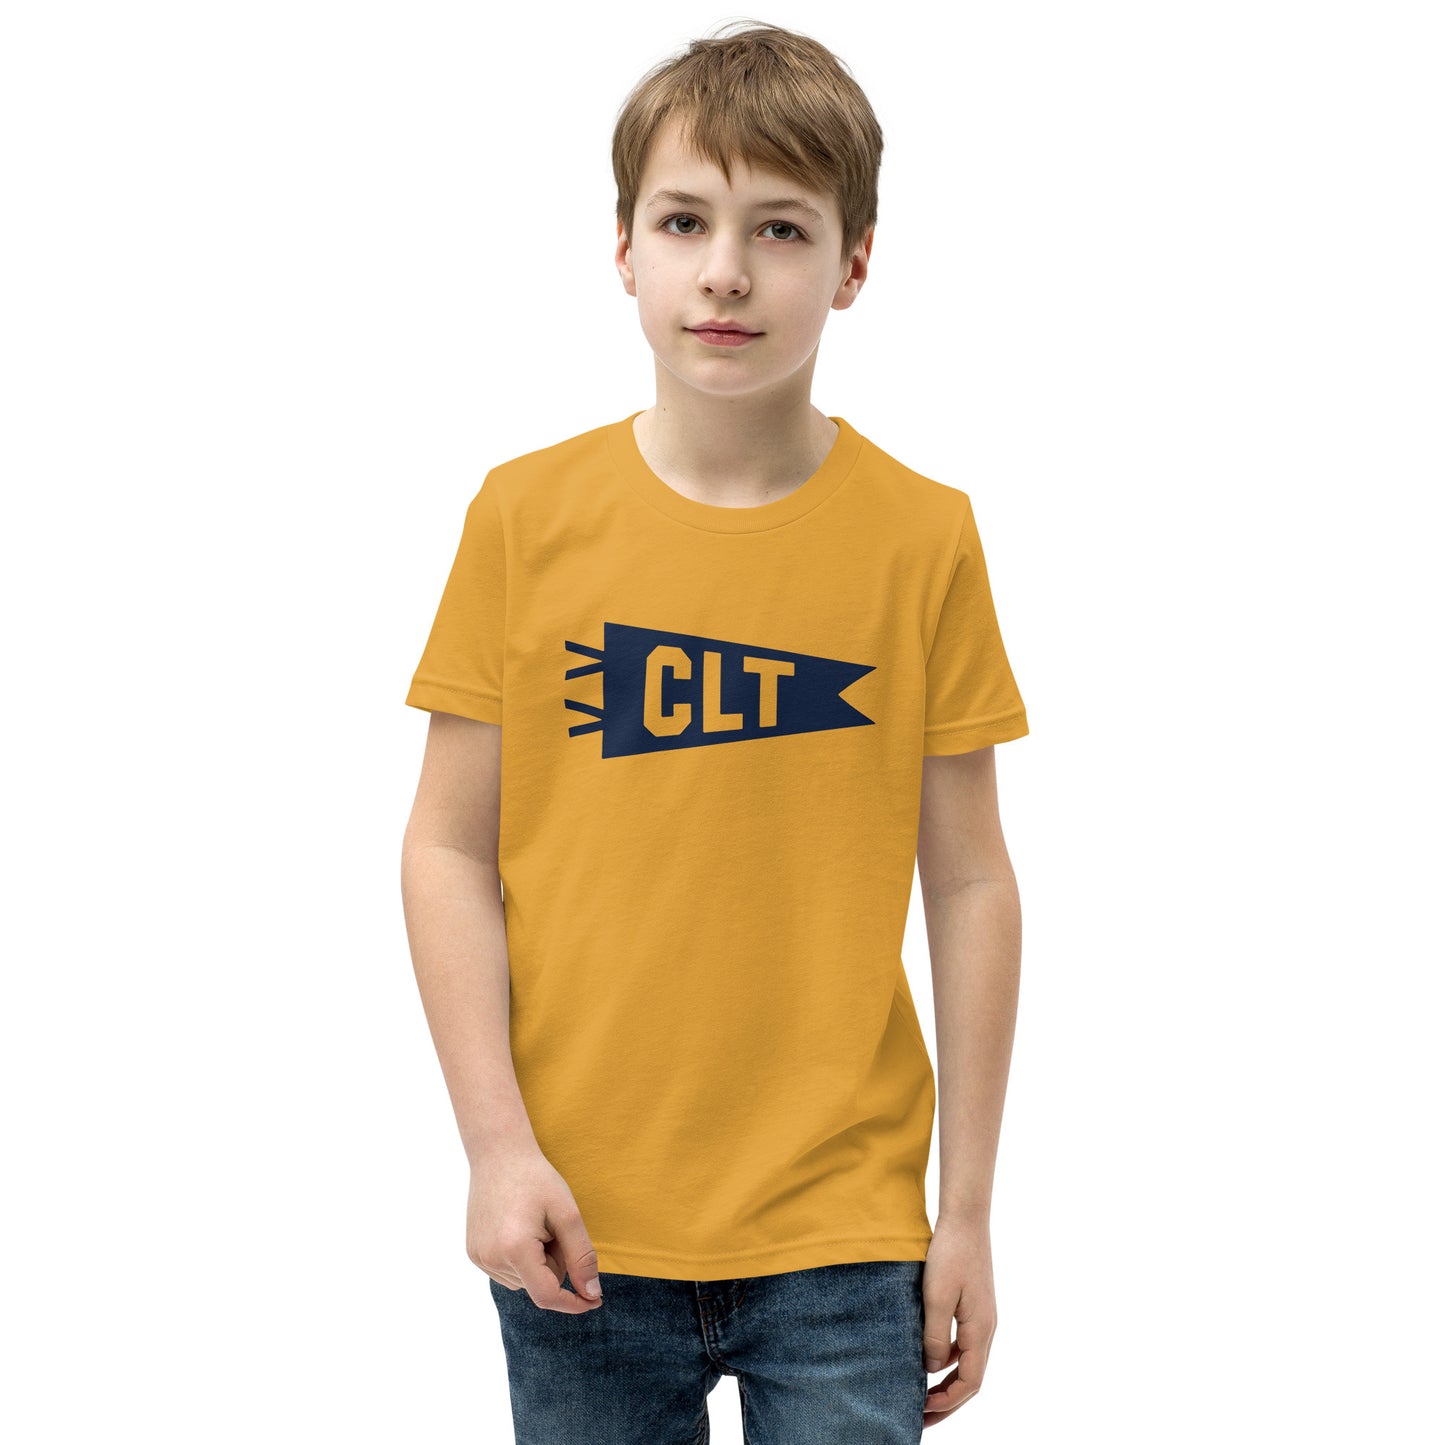 Kid's Airport Code Tee - Navy Blue Graphic • CLT Charlotte • YHM Designs - Image 08